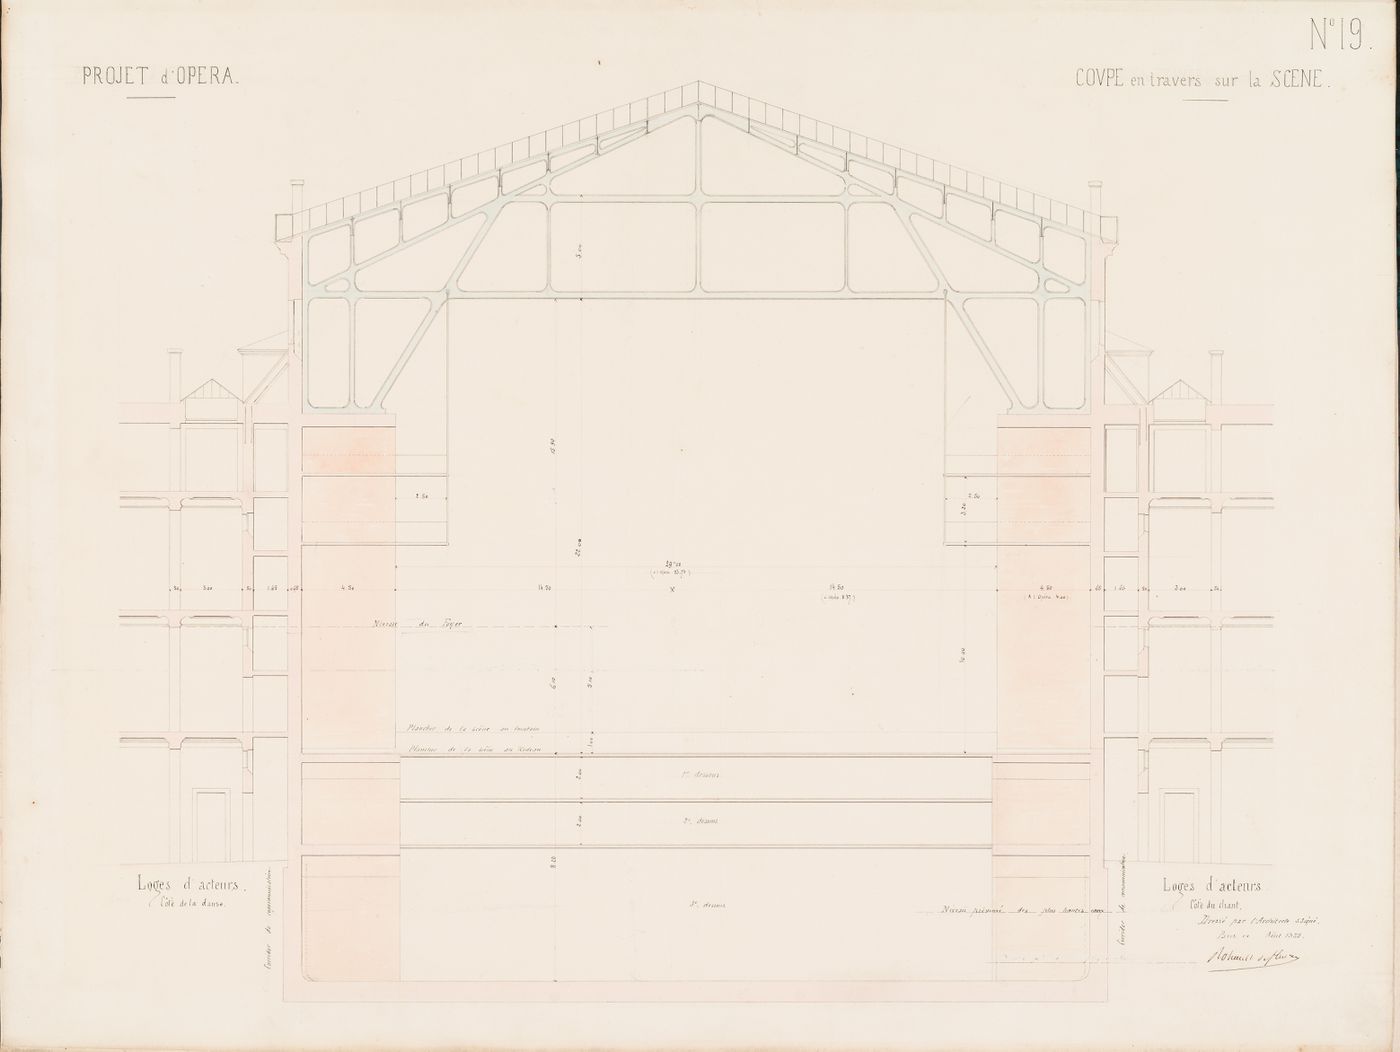 Project for an opera house for the Théâtre impérial de l'opéra: Cross section through the stage showing the sub-stage floor levels and roof trusses